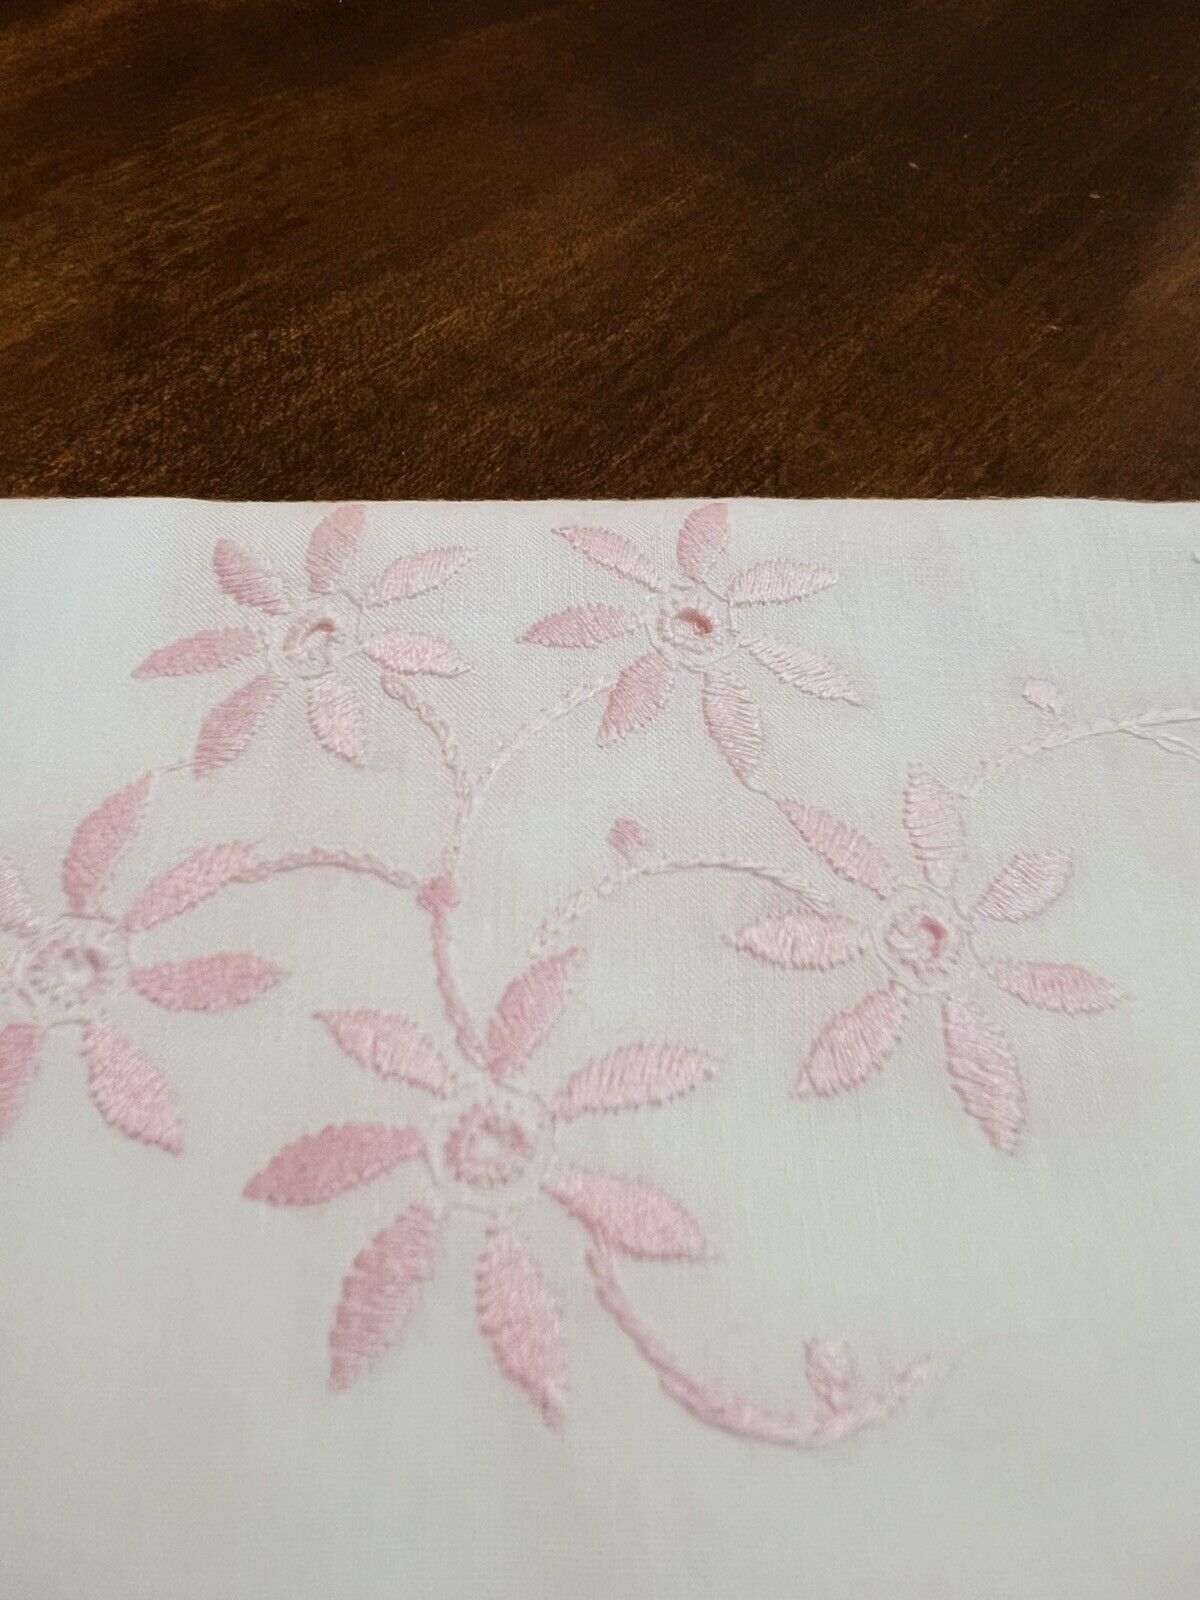 2 Matching Embroidered Runners White With Pink Flowers and vines